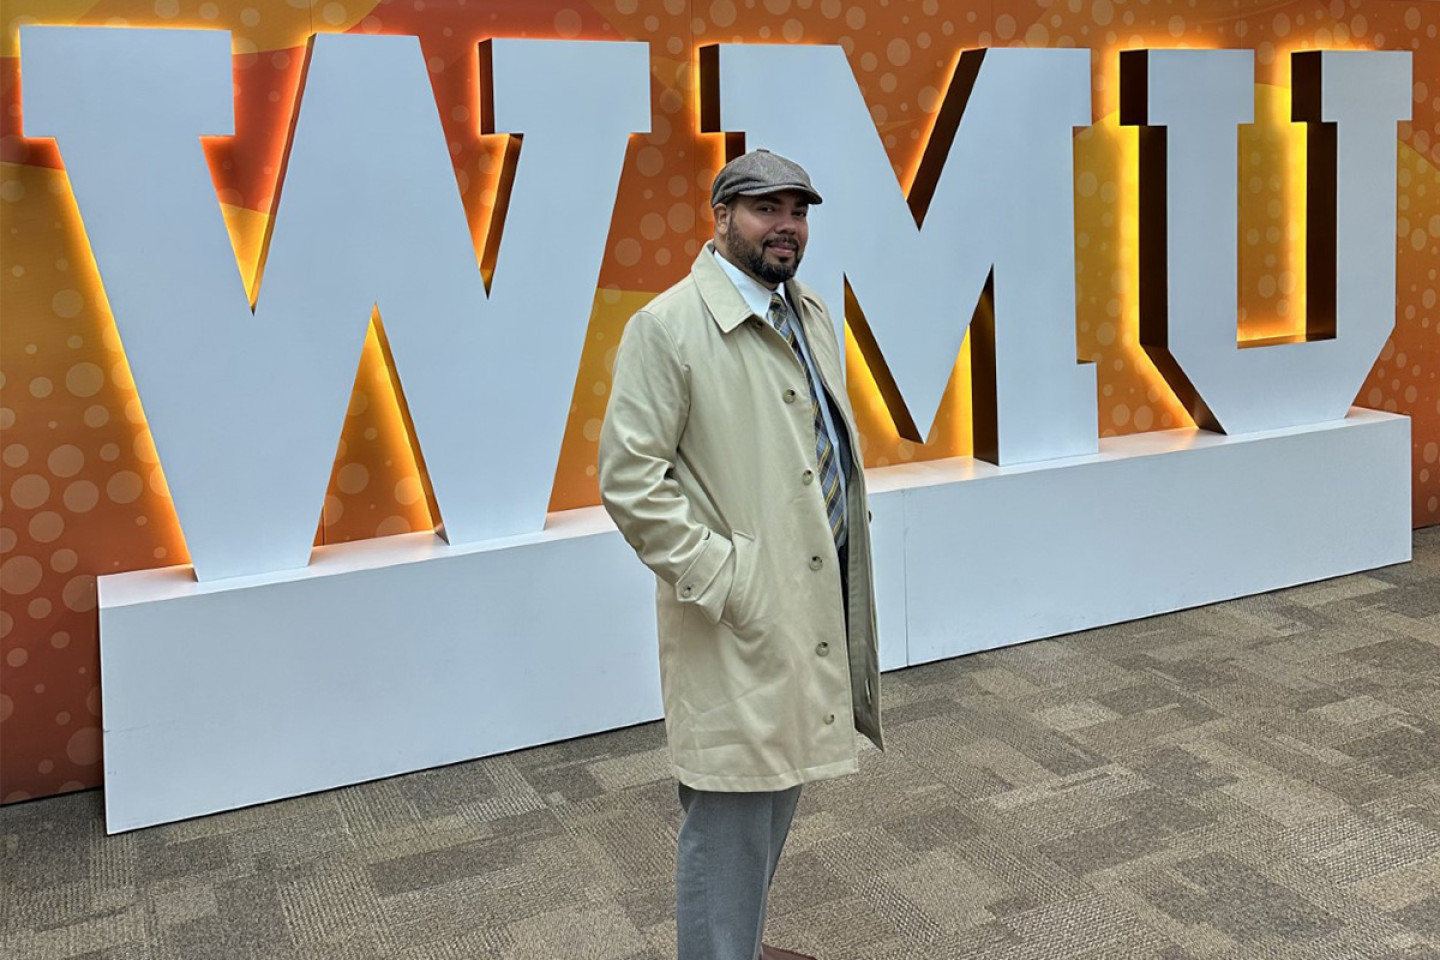 Julian Vasquez Heilig stands in front of an orange backdrop with WMU in large, white letters.